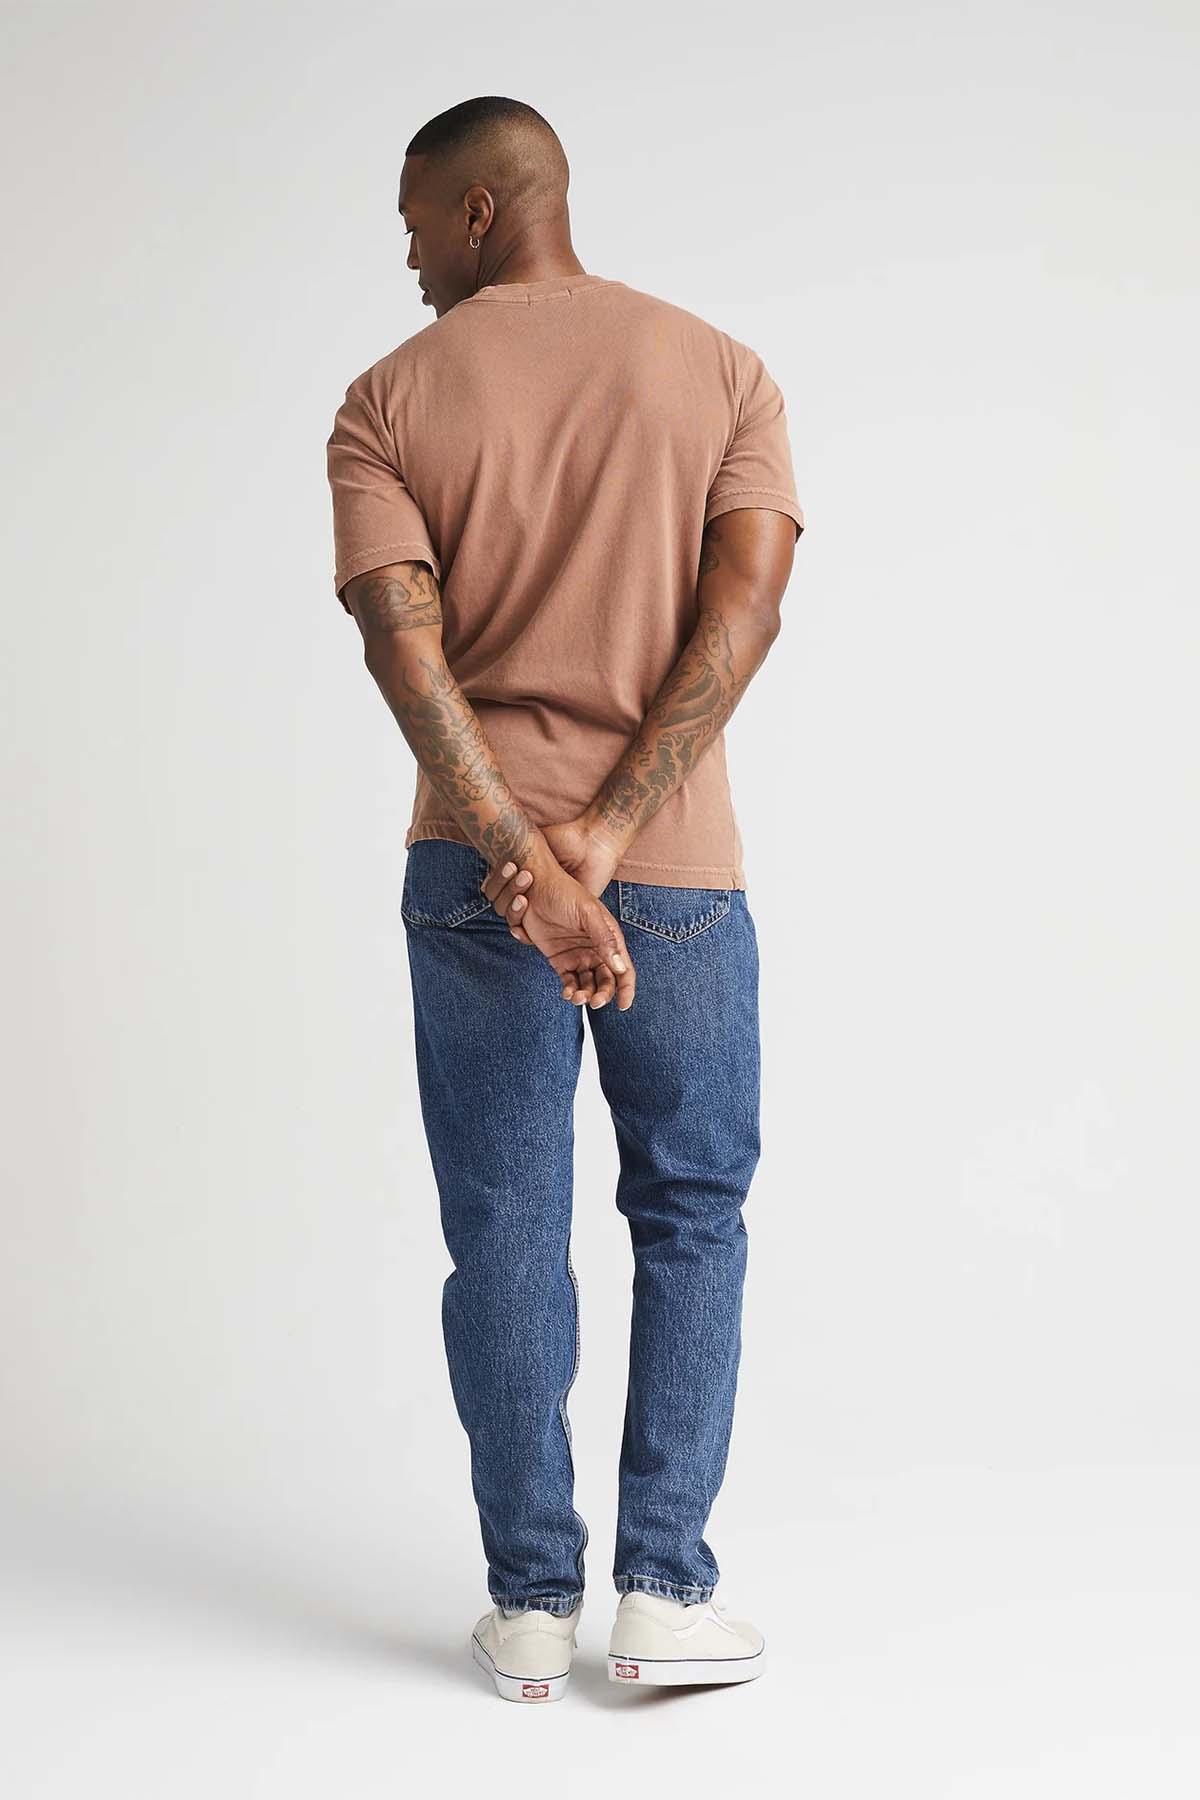 Richer Poorer - Relaxed SS Tee - Latte - Back